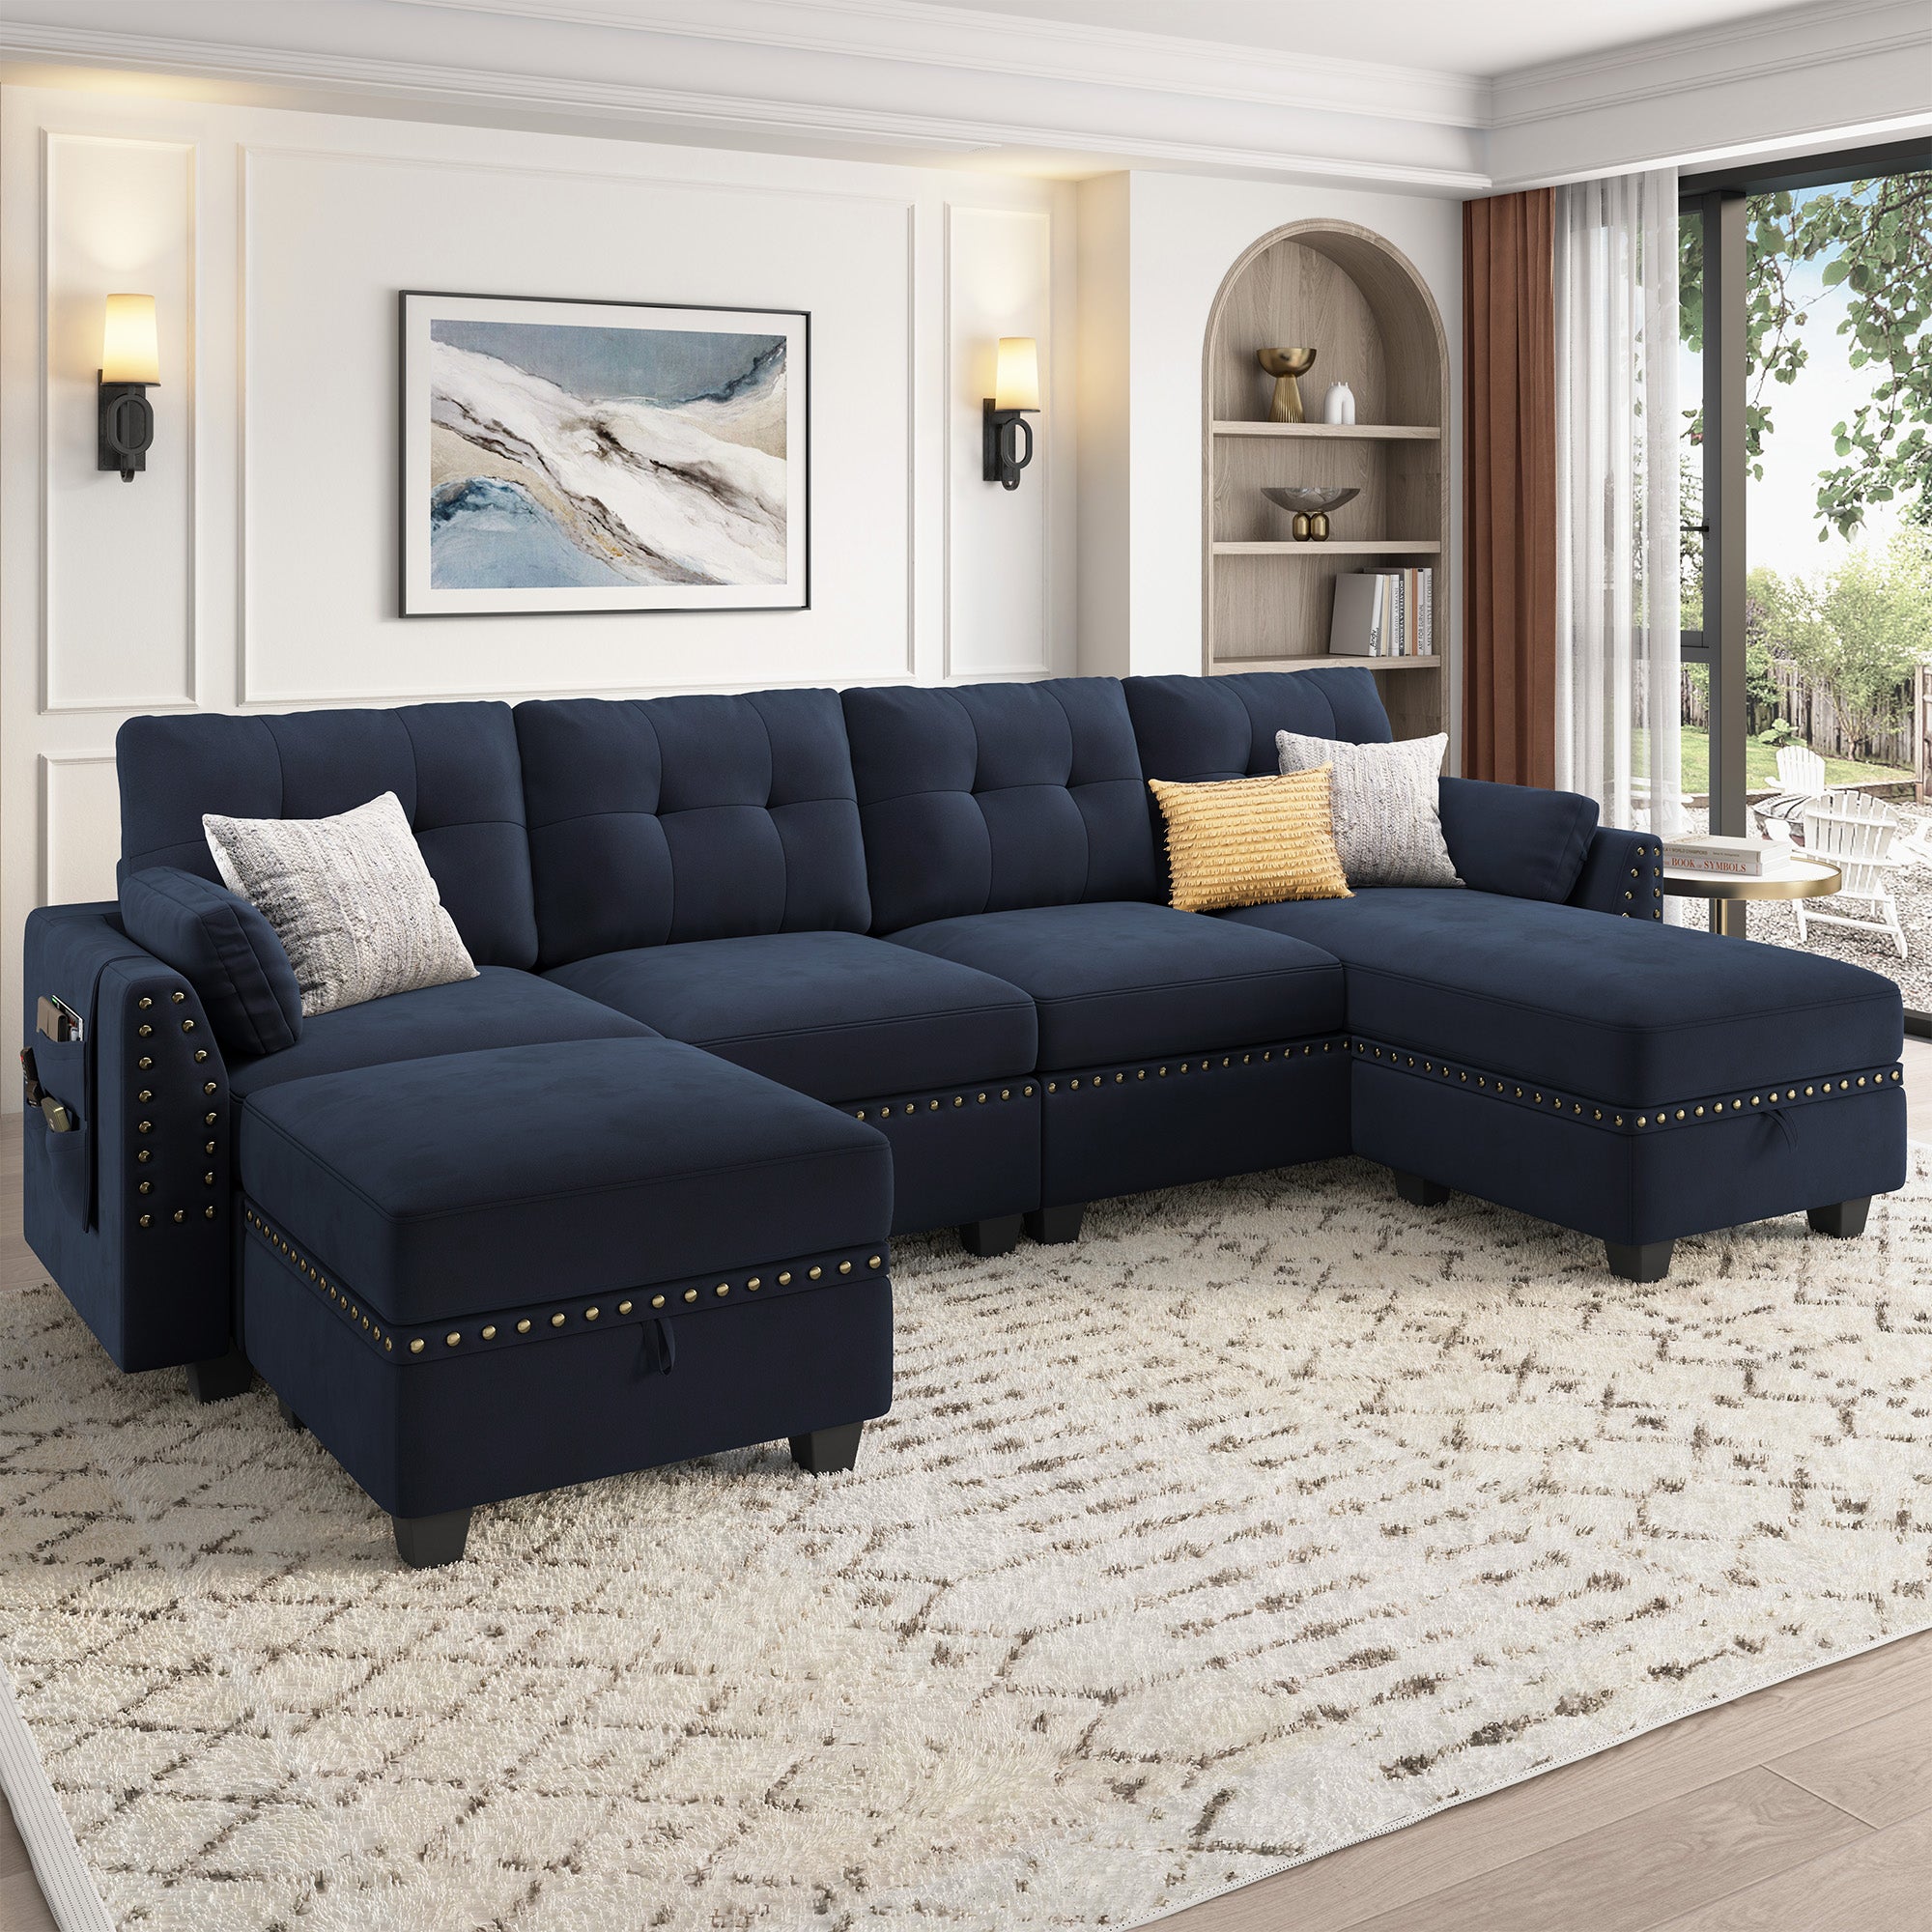 HONBAY Velvet 4-Seat U-Shaped Sectional Sofa with Storage Reversible Chaise Set